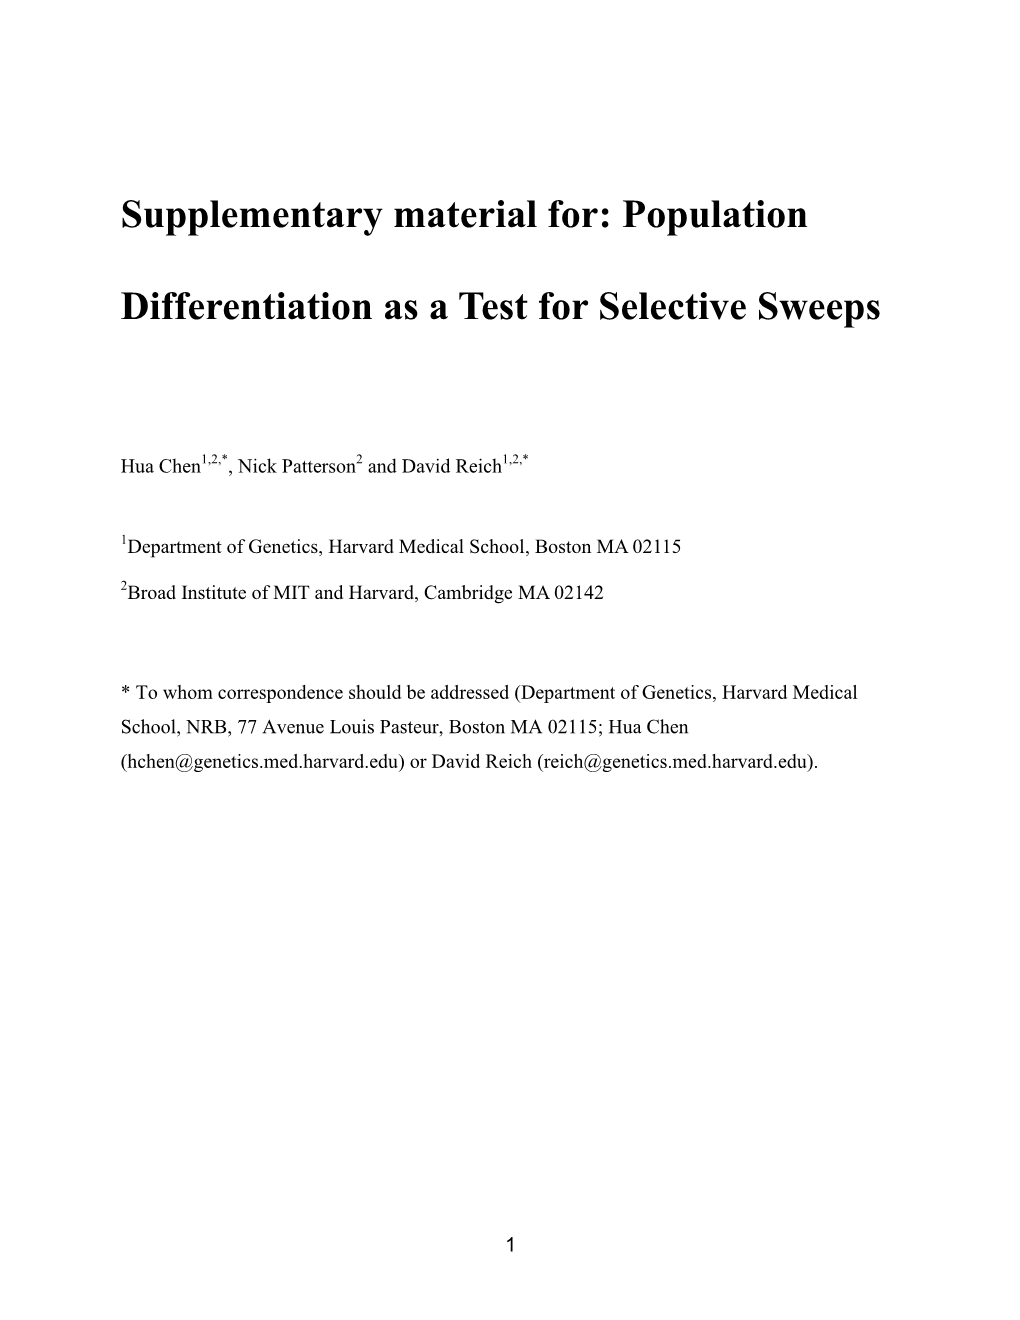 Supplementary Material For: Population